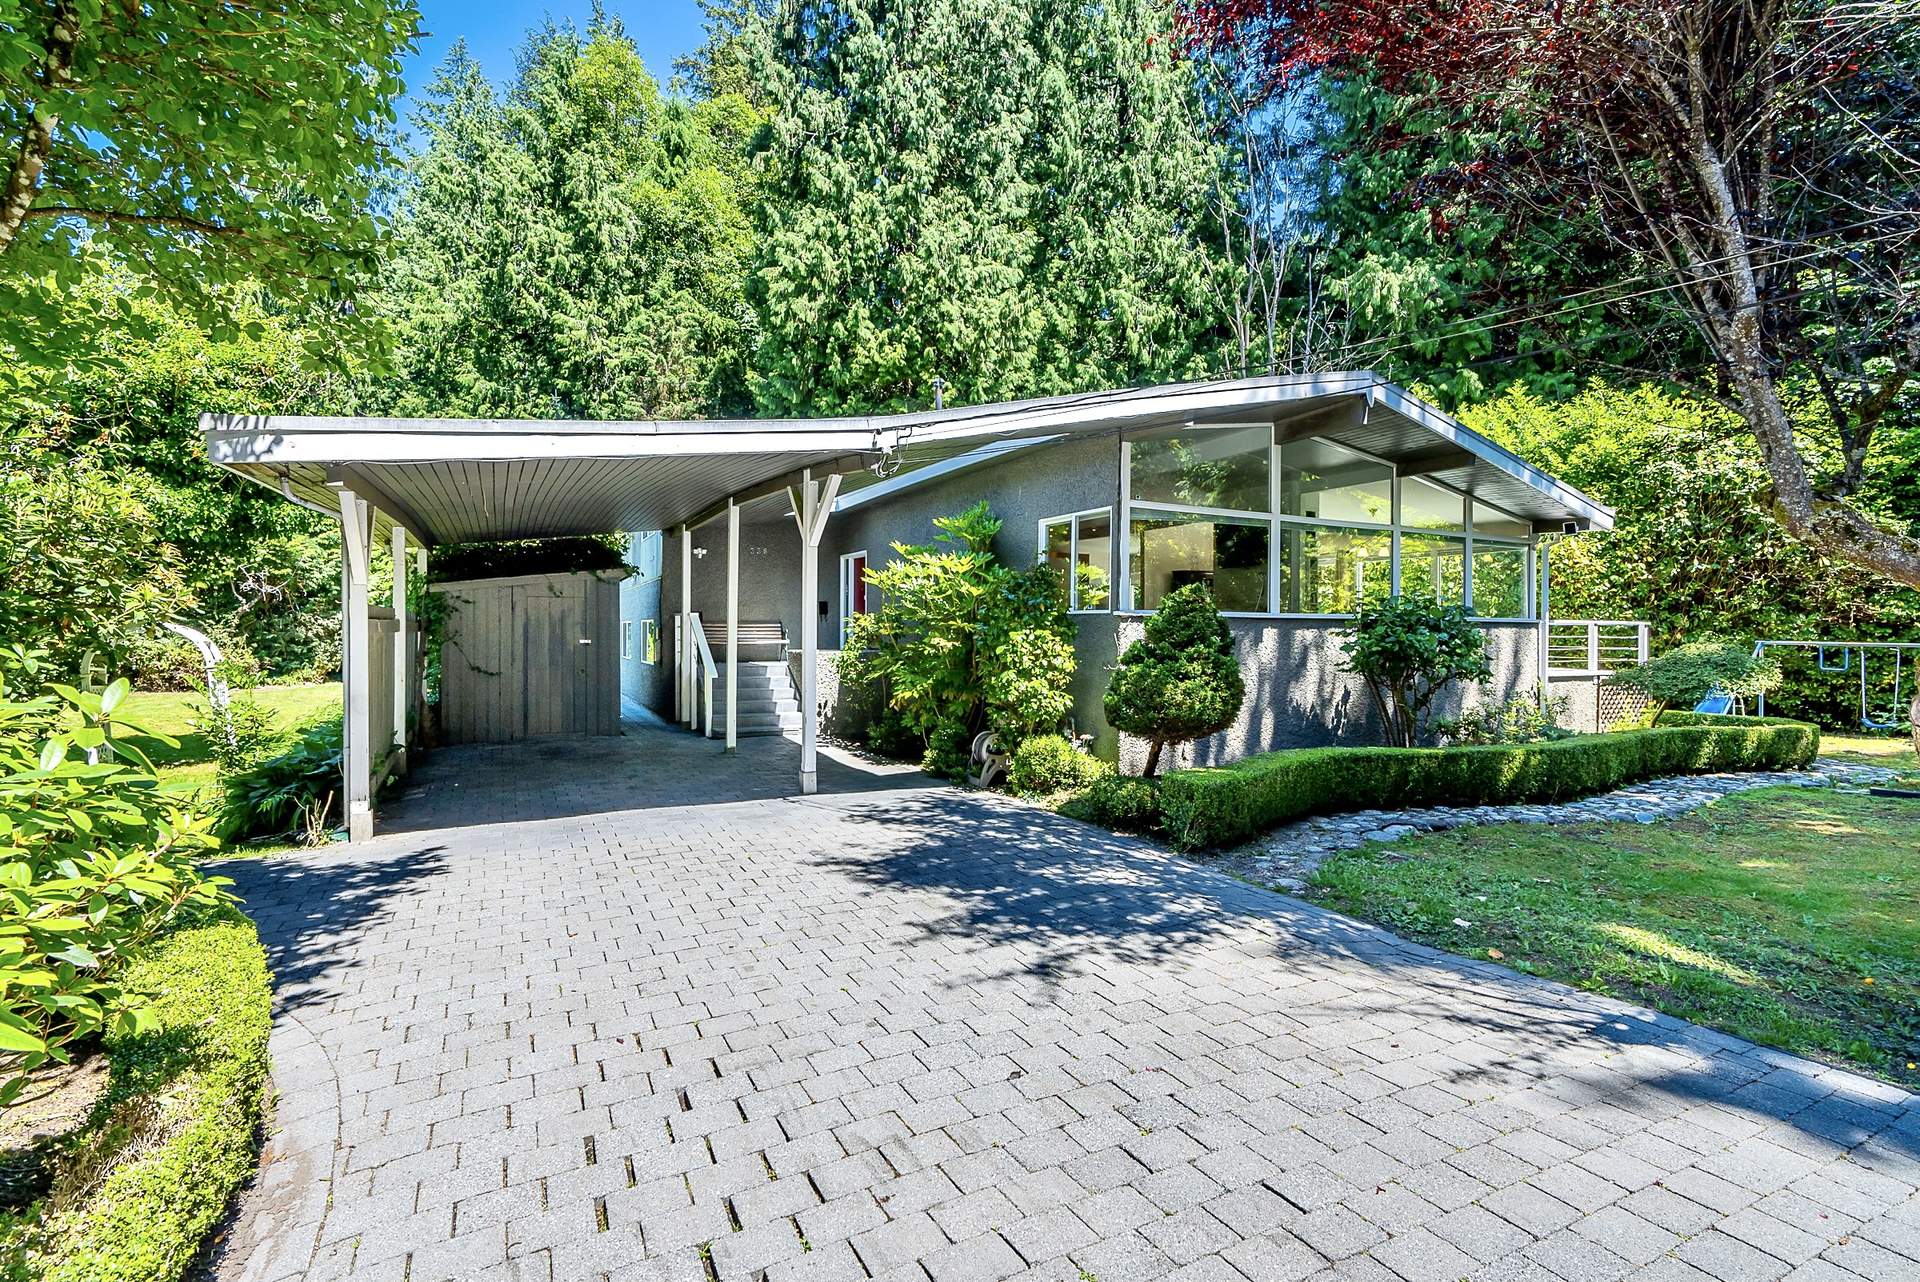 INCREDIBLE VALUE! A Post and Beam Modernist Gem!